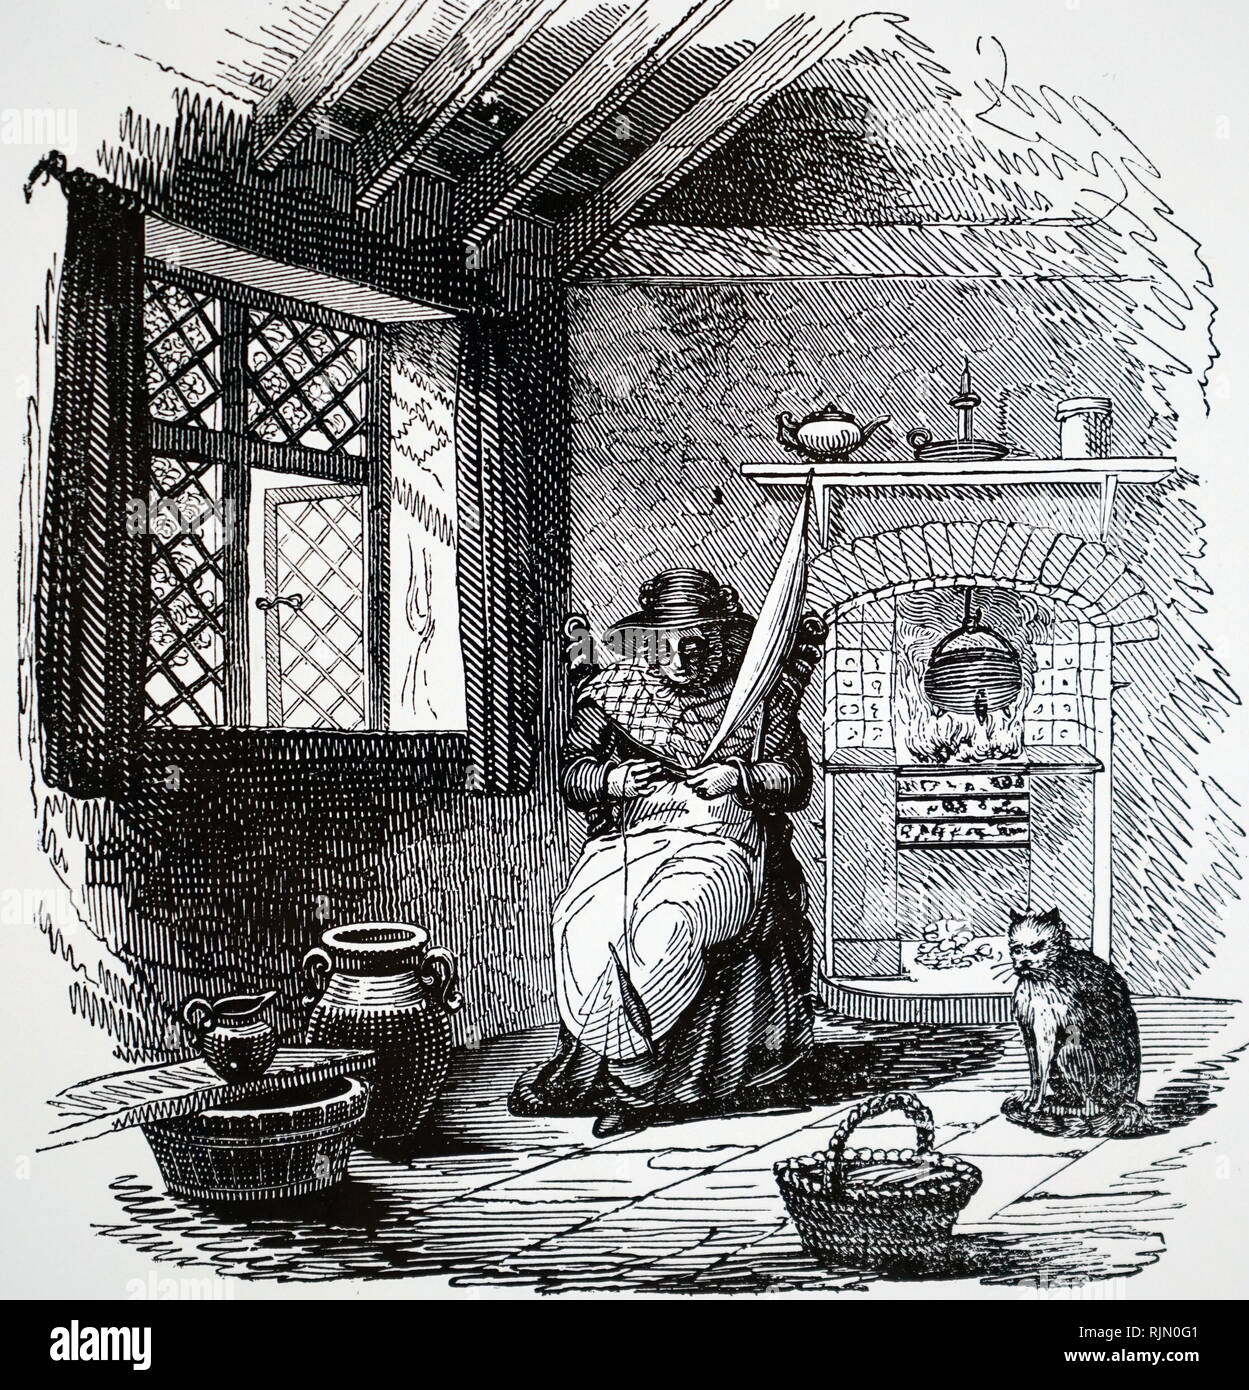 Cottager spinning with Distaff. The window has leaded lights and is a casement. Curtains are hung by rings from a pole. Illustration based on Richard Guest 'History of Cotton Manufacture'. 1823 Stock Photo